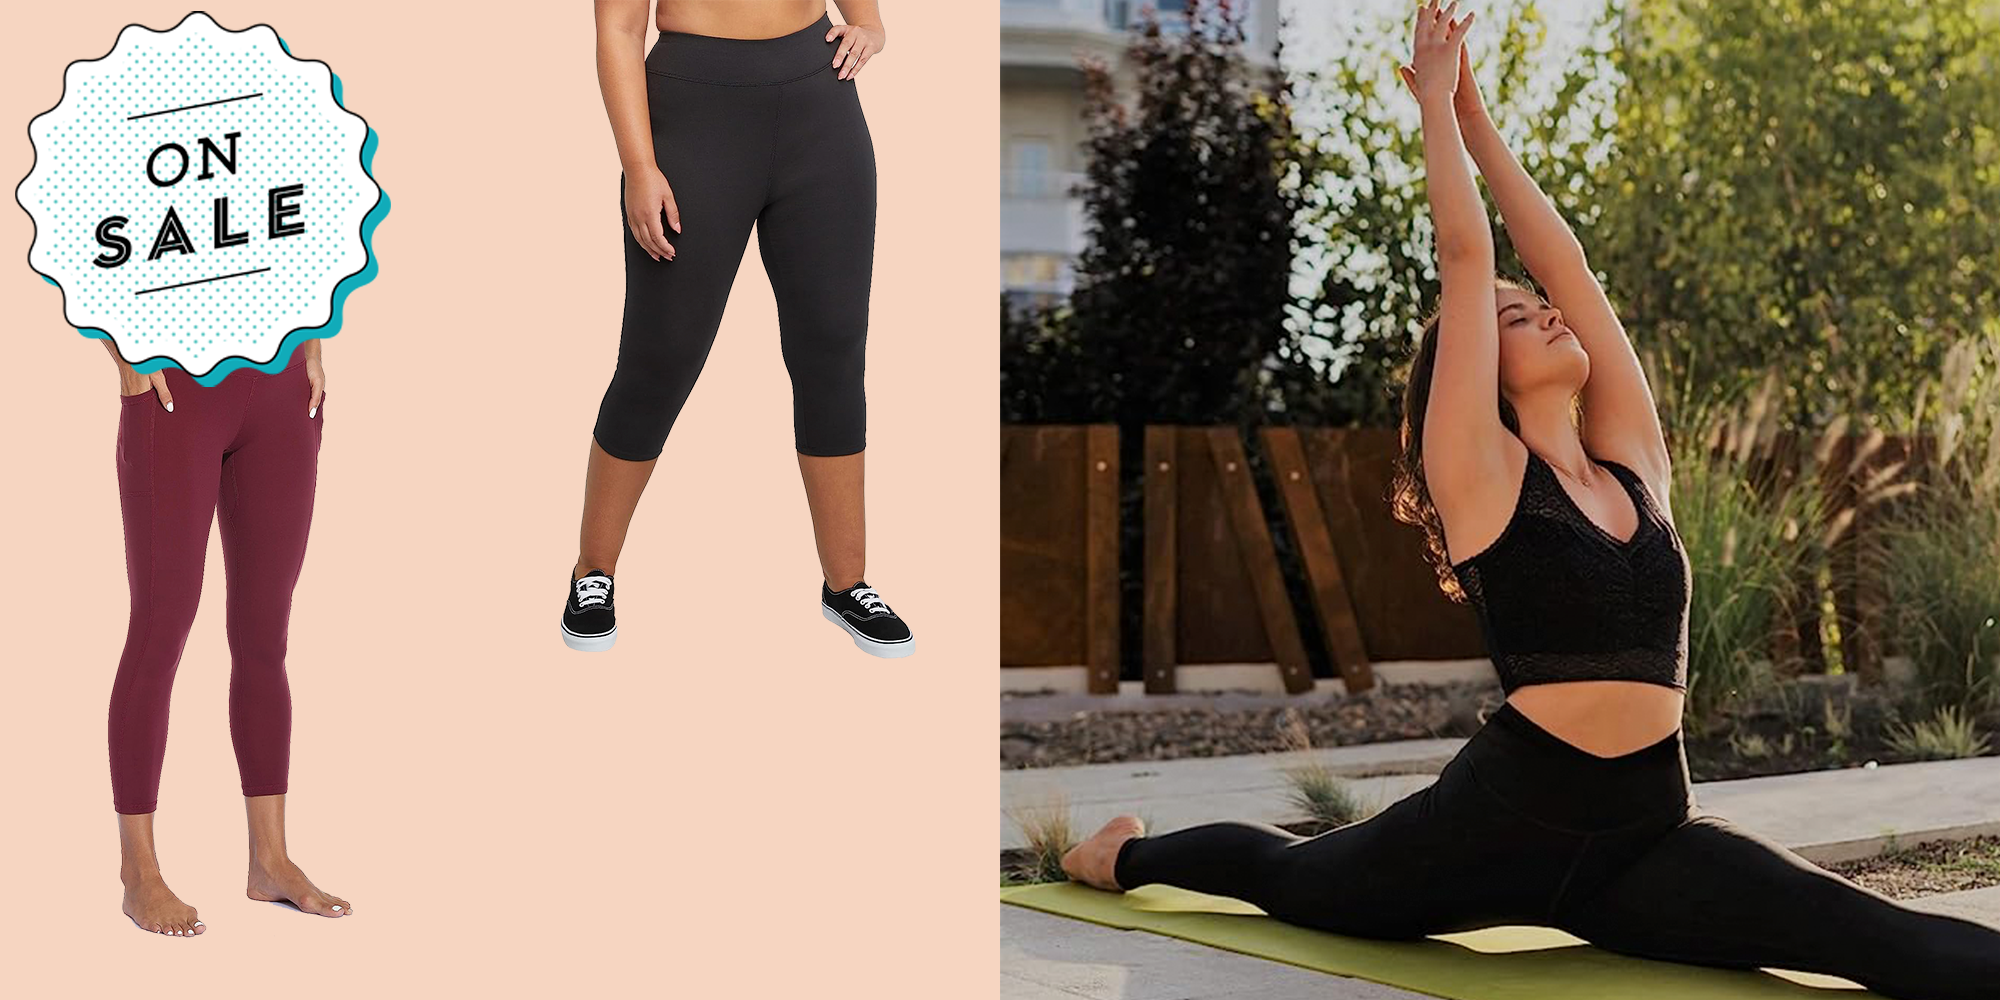 Lululemon July Fourth Sale: Score 61% Off Align Leggings And More